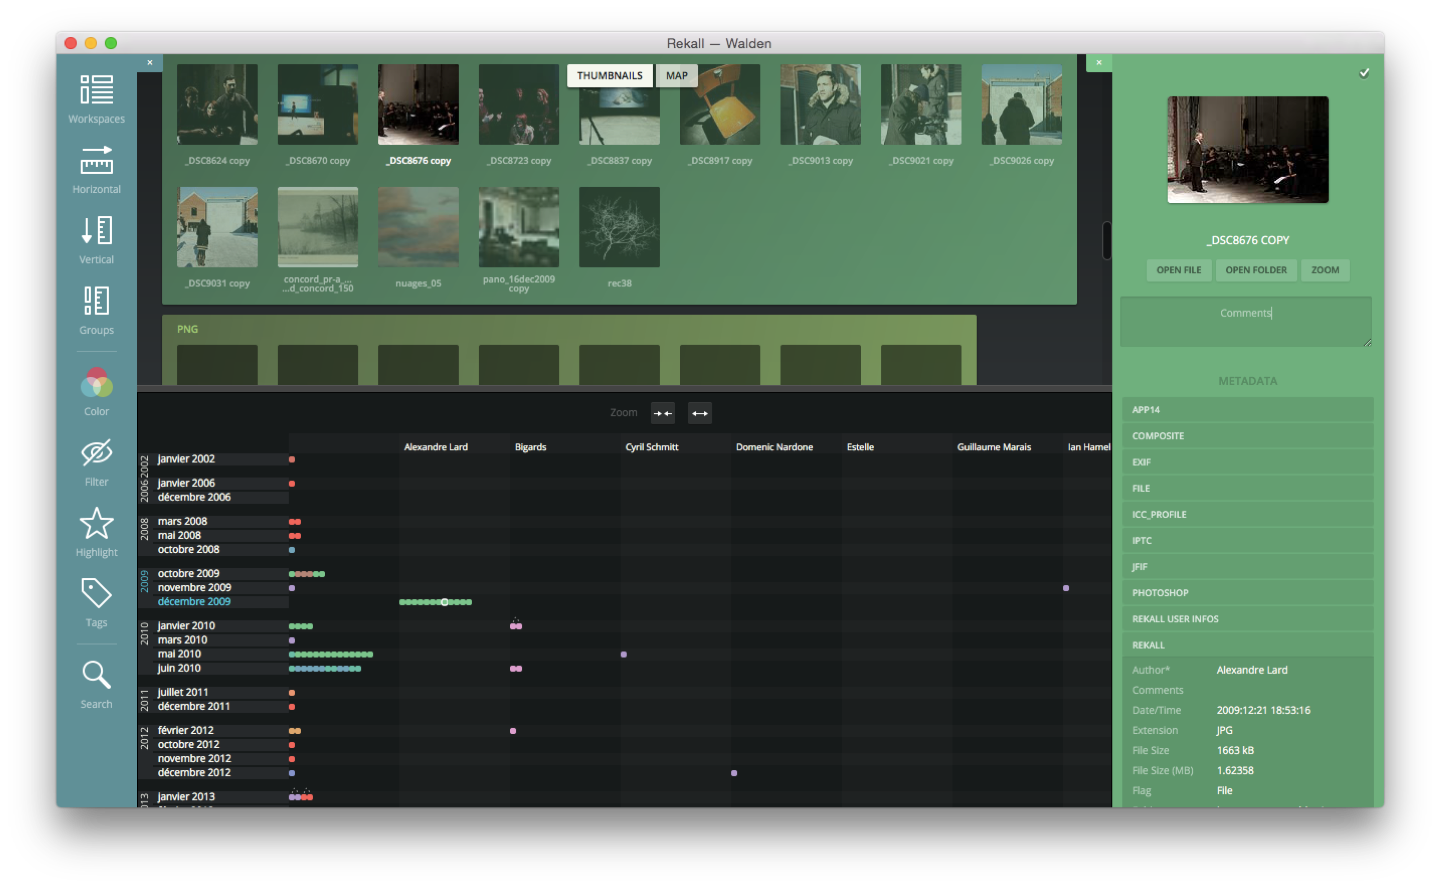 A screenshot from the Rekall interface showing various files.